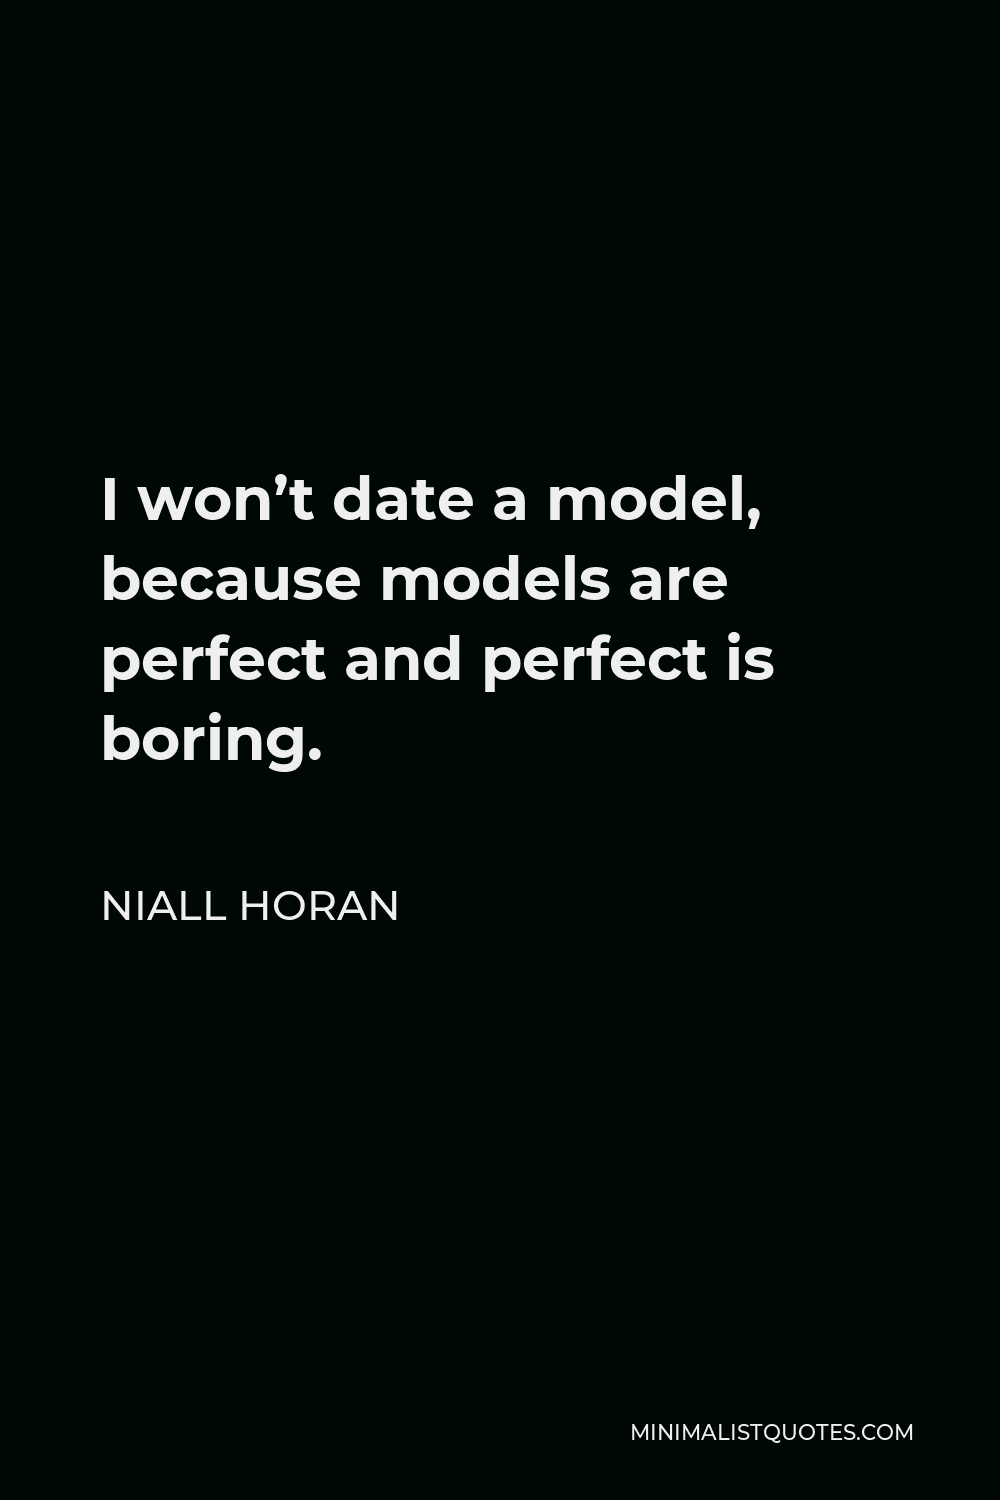 Niall Horan Quote - I won’t date a model, because models are perfect and perfect is boring.